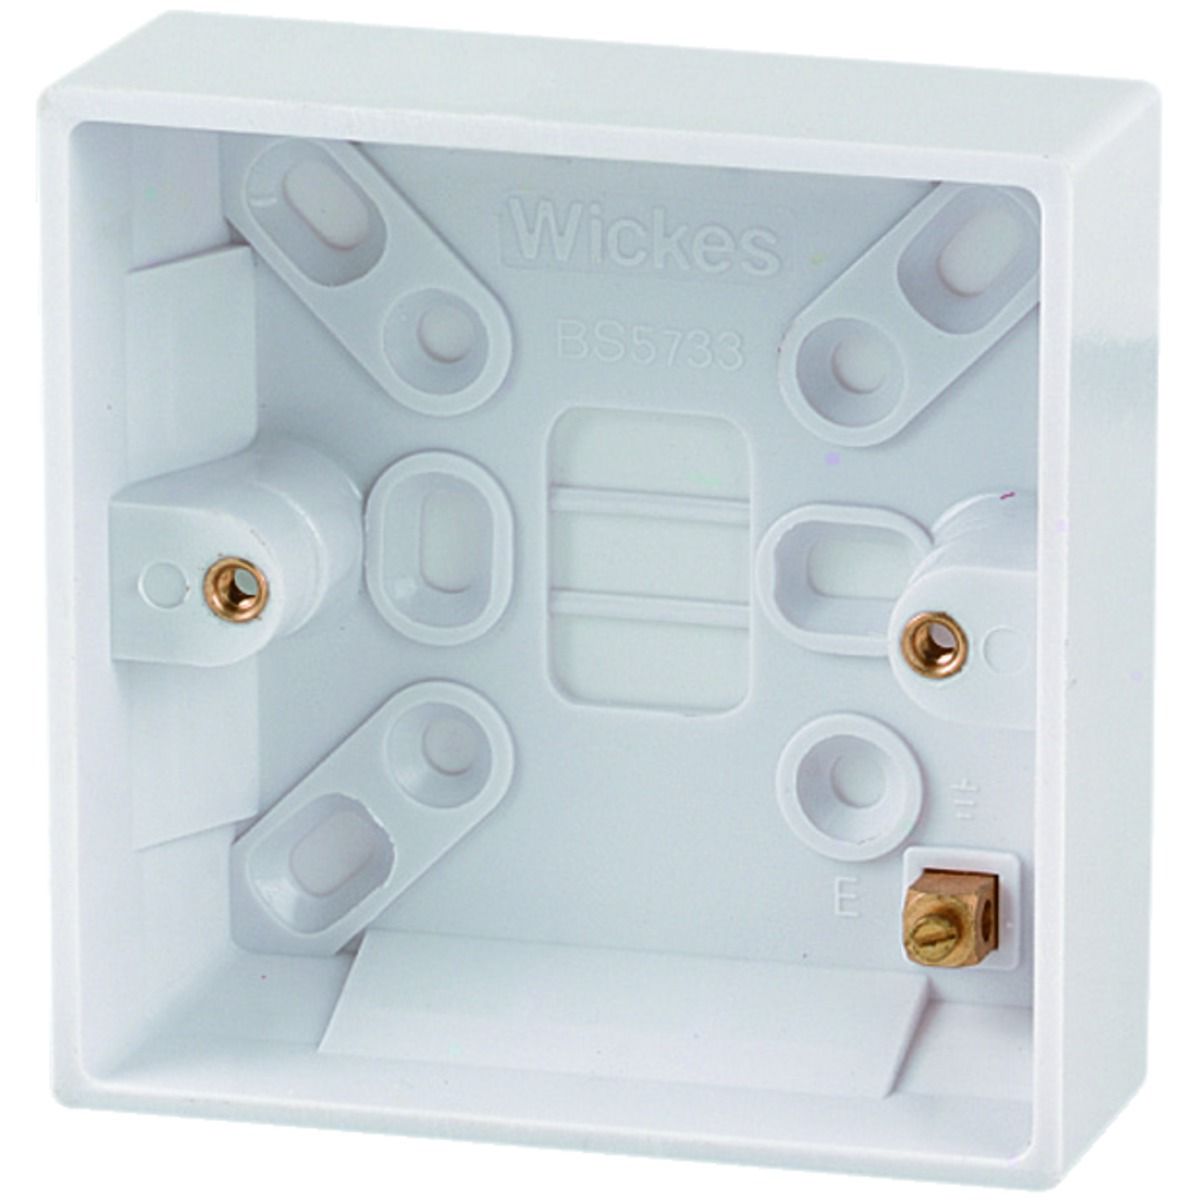 Image of Wickes 1 Gang Pattress Box - White 25mm